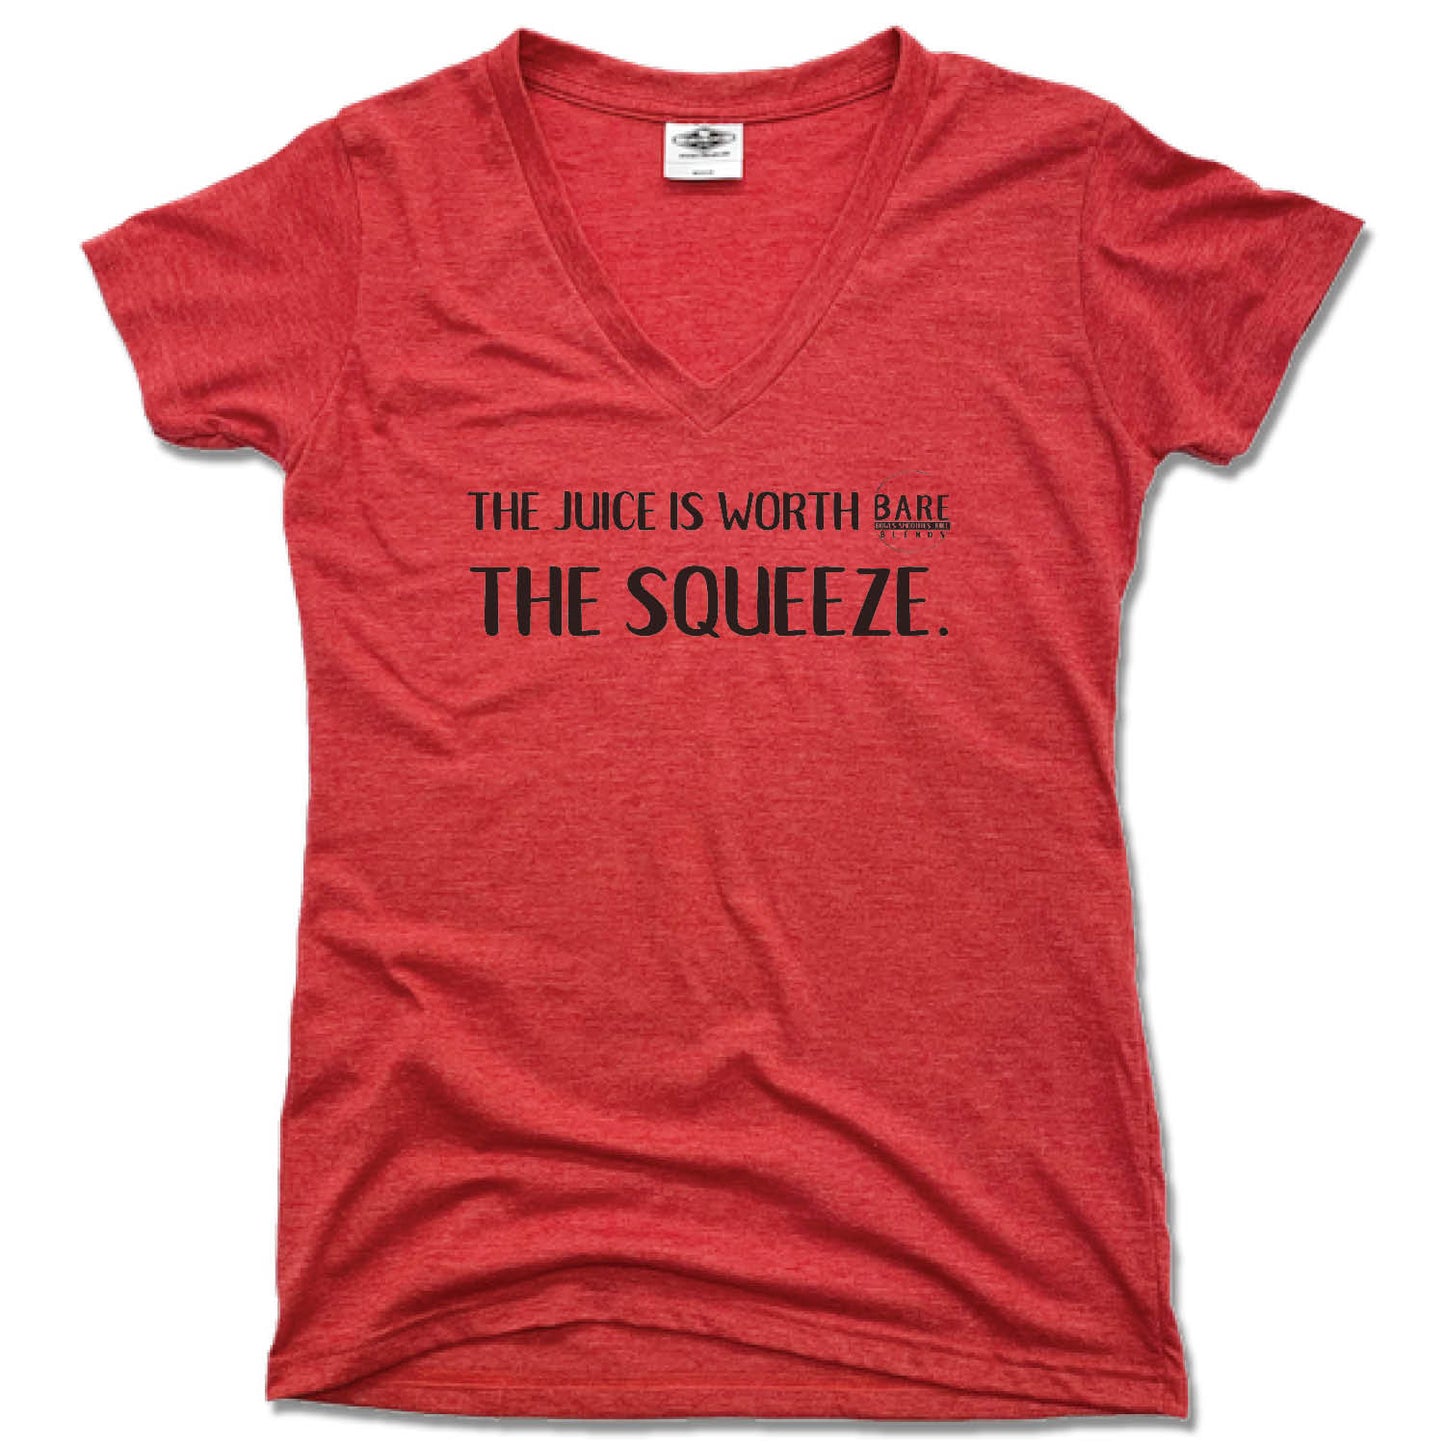 BARE BLENDS | LADIES RED V-NECK | THE SQUEEZE BLACK LOGO